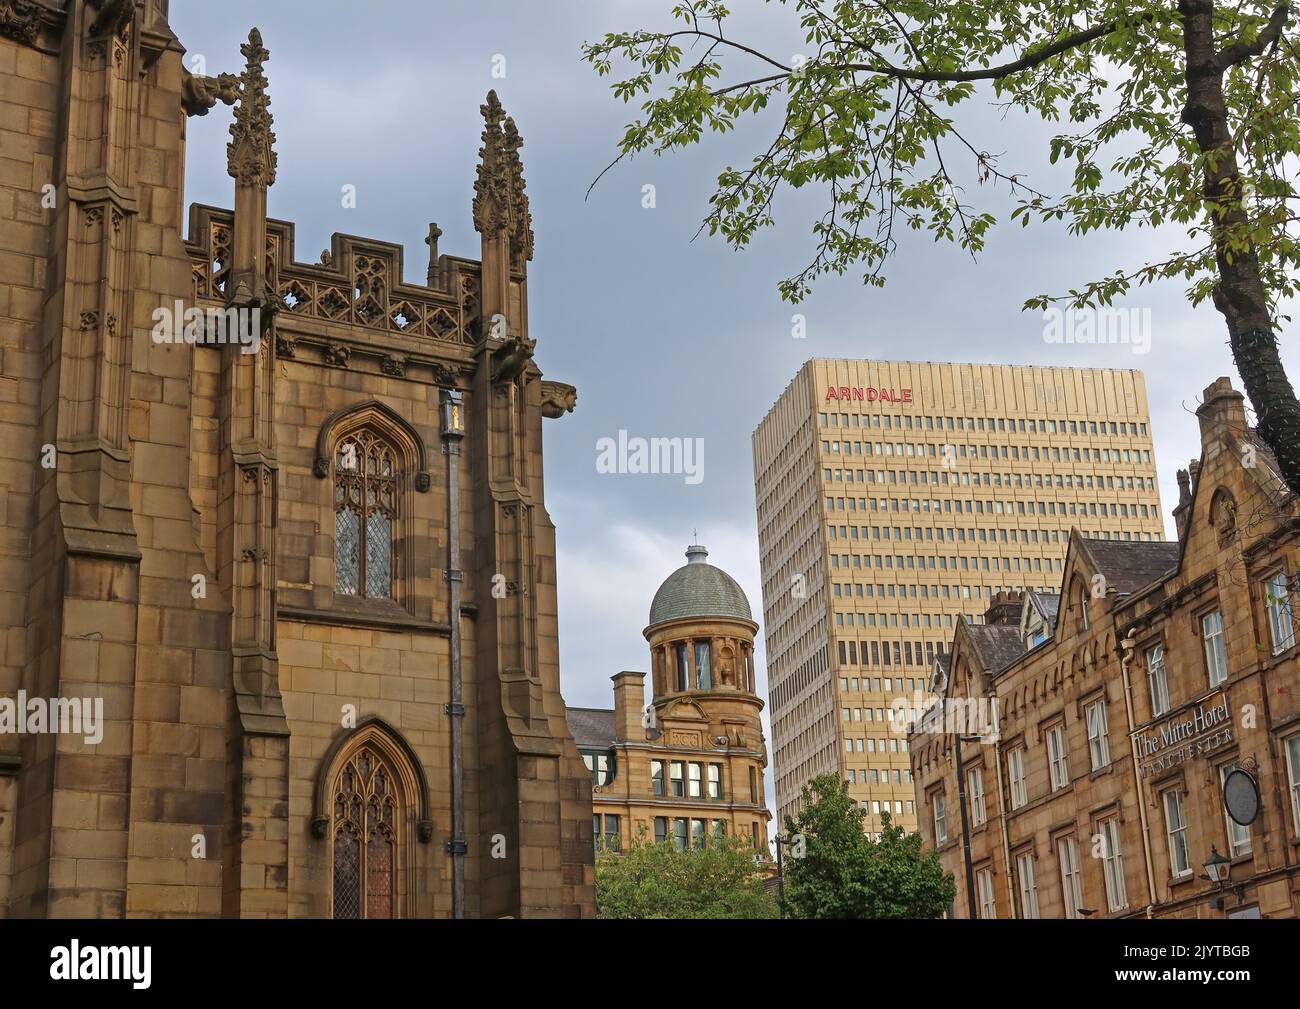 Old & new Manchester architecture, 1800s cathedral ,1970s  Arndale Centre and 1700s Mitre Hotel, Victoria St, Manchester, England,UK, M3 1SX Stock Photo